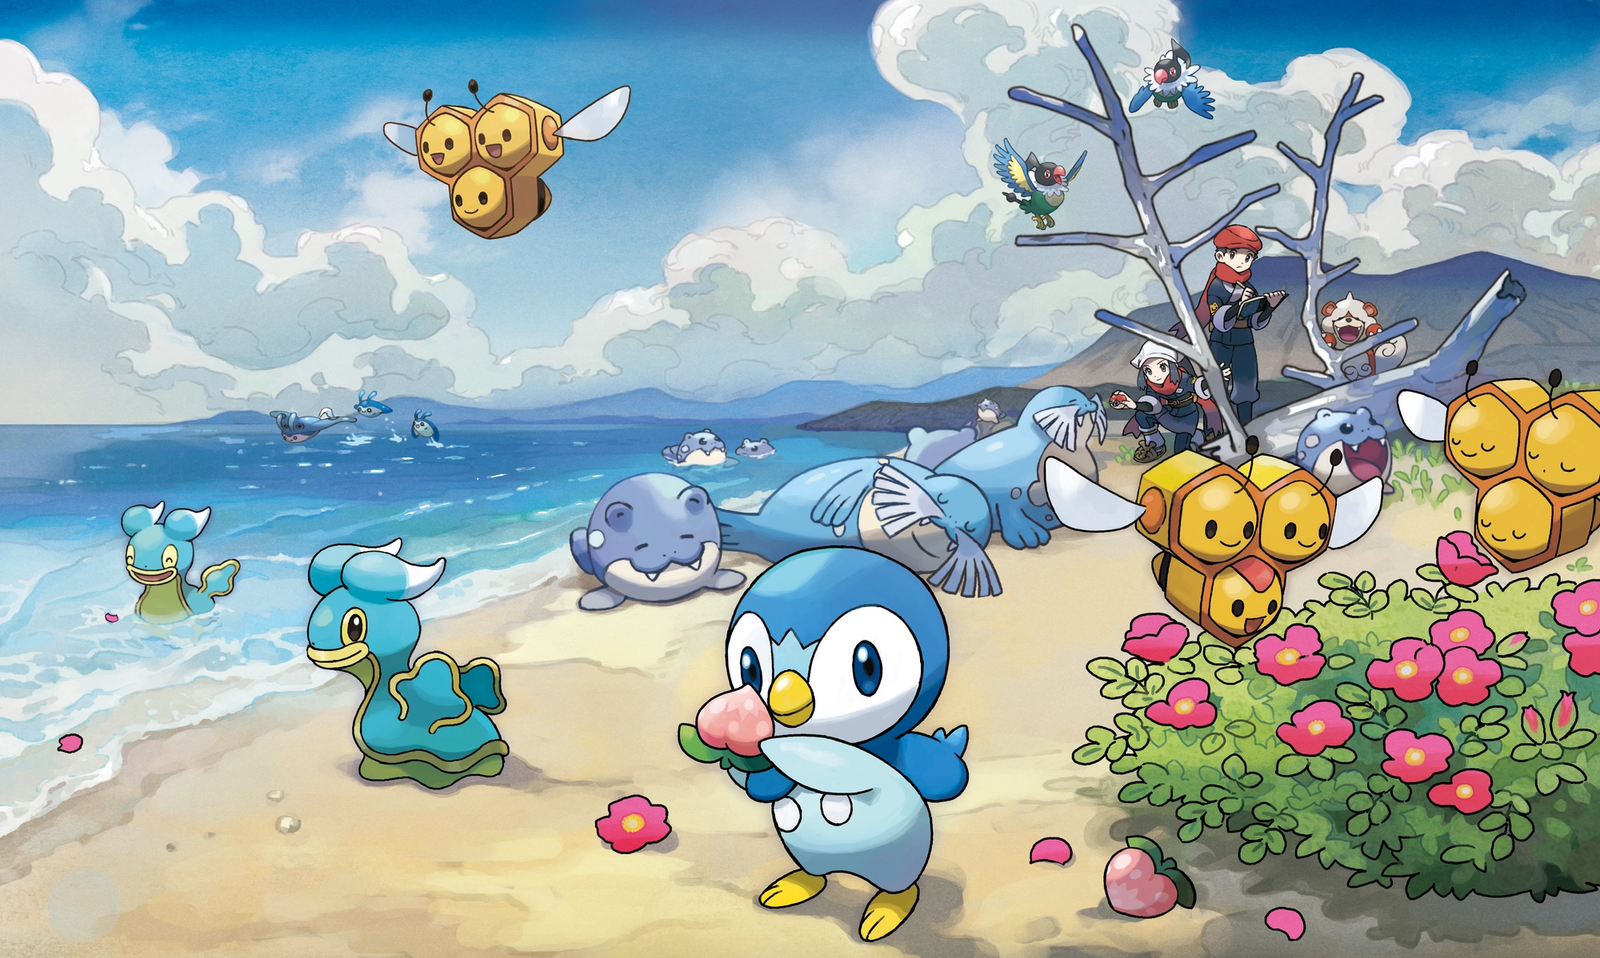 Pokemon Legends: Arceus artwork featuring Combee, Piplup, Shellos, Spheal, Walrein, Chatot, and Growlithe,